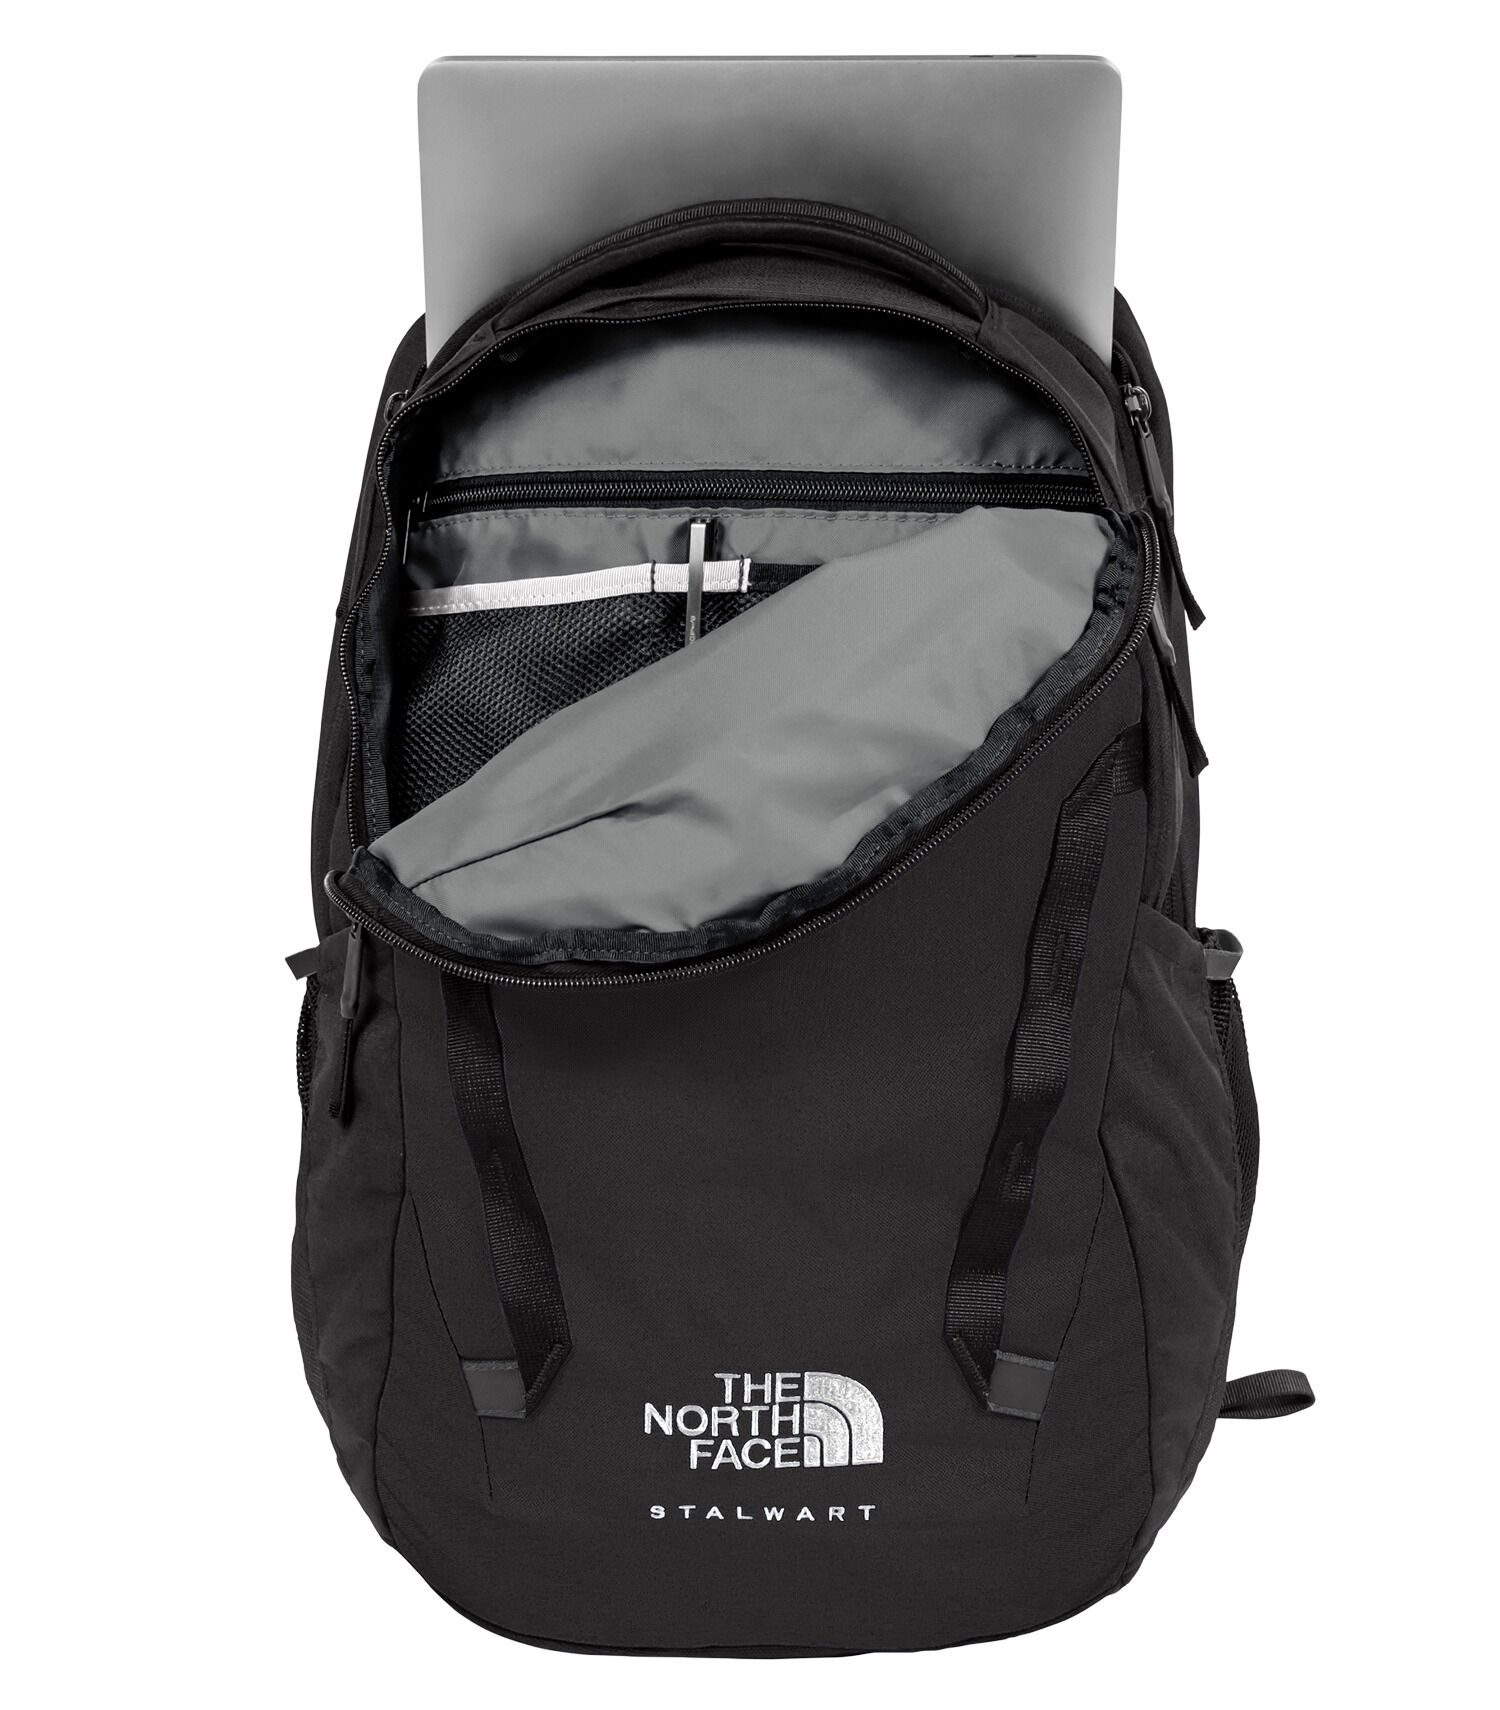 THE NORTH FACE STALWART BACKPACK #NF0A52S6 Black Open